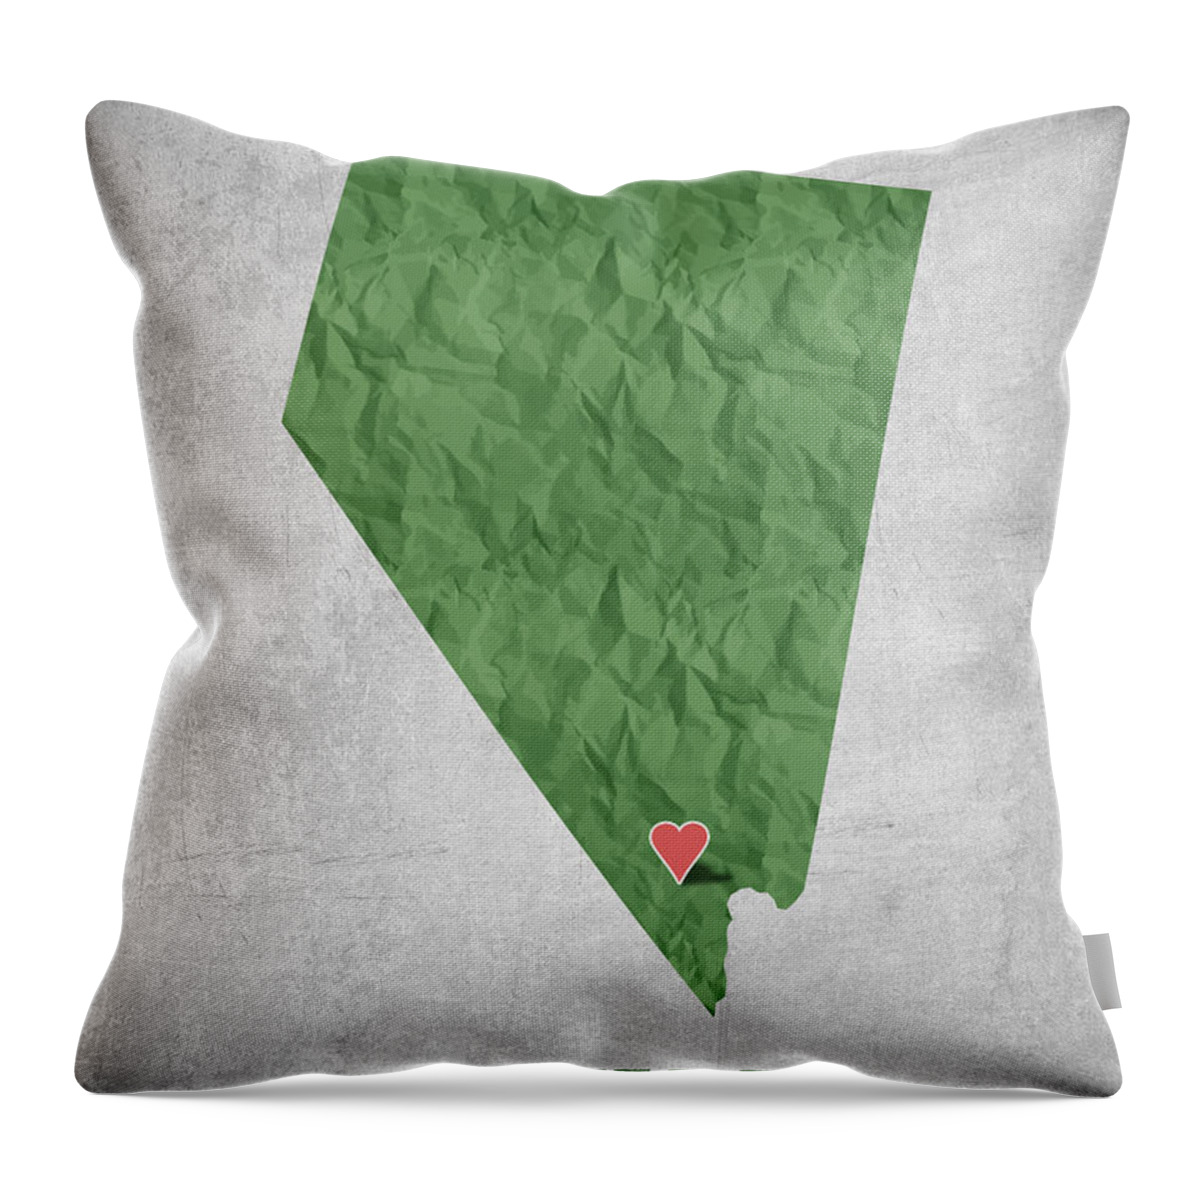 I love Las Vegas Nevada - Green Throw Pillow by Aged Pixel - Pixels